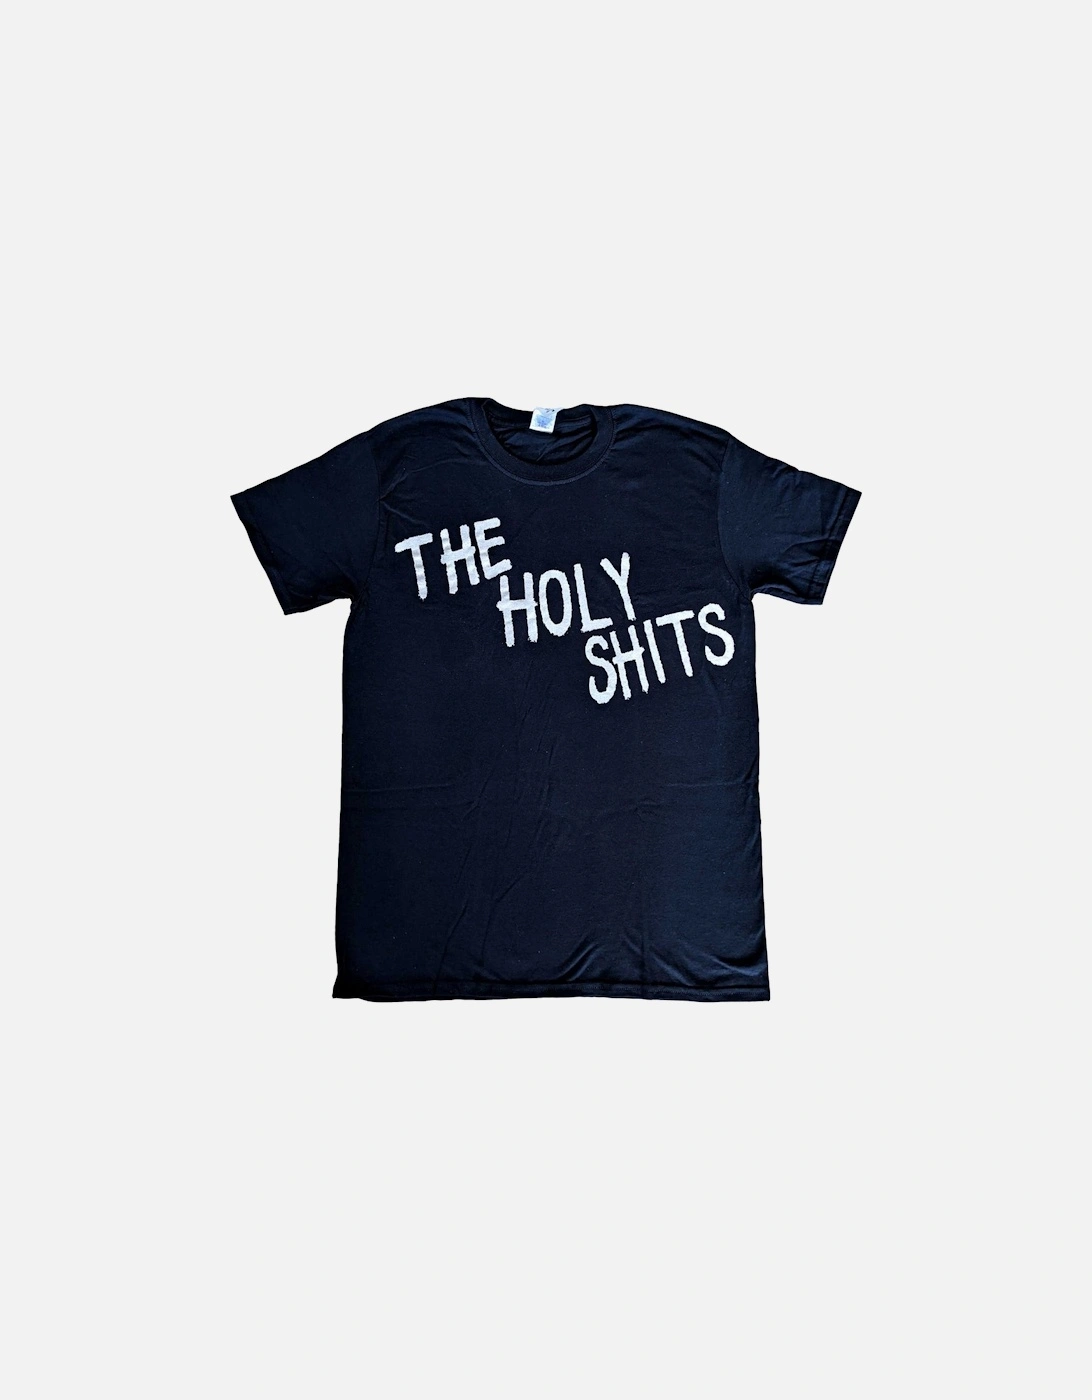 Unisex Adult The Holy Shits London 2014 Cotton T-Shirt, 3 of 2